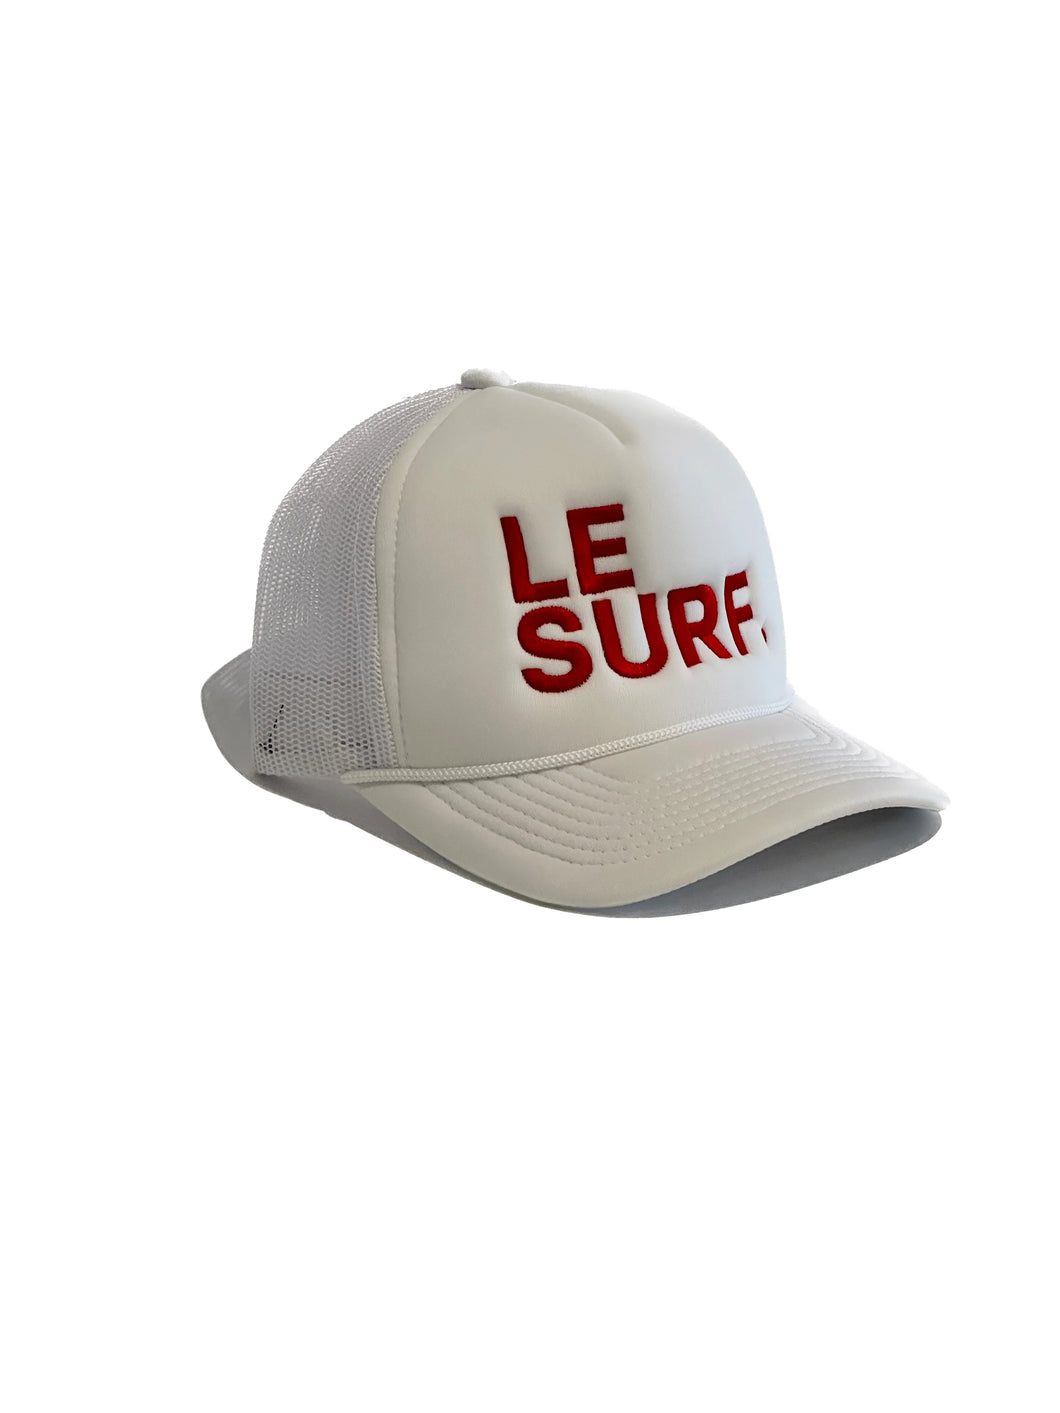 Le Surf. Hat WHITE-RED